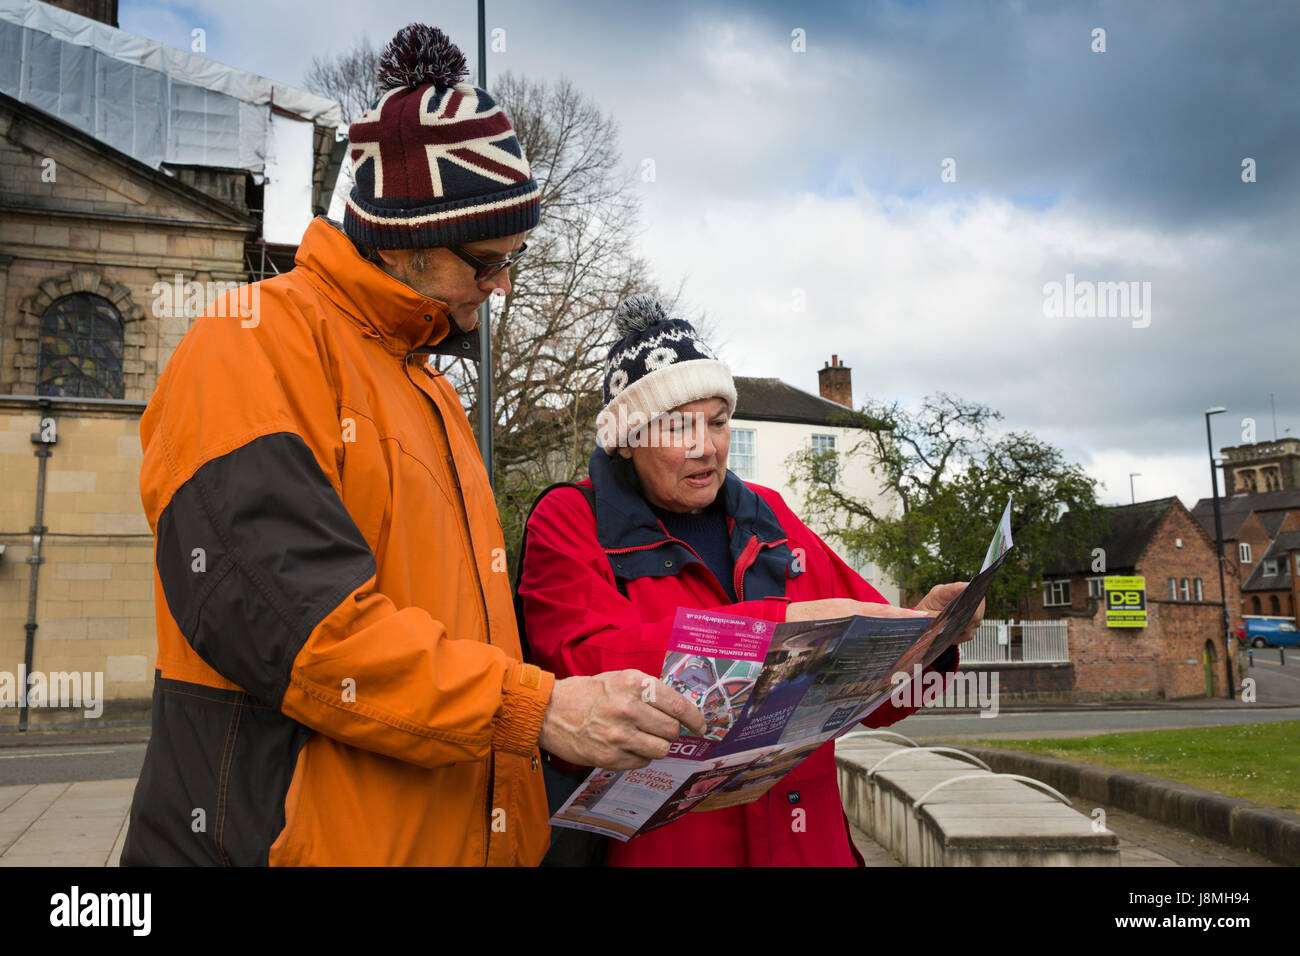 UK, England, Derbyshire, Derby, tourists wrapped up for bad weather looking at map Stock Photo